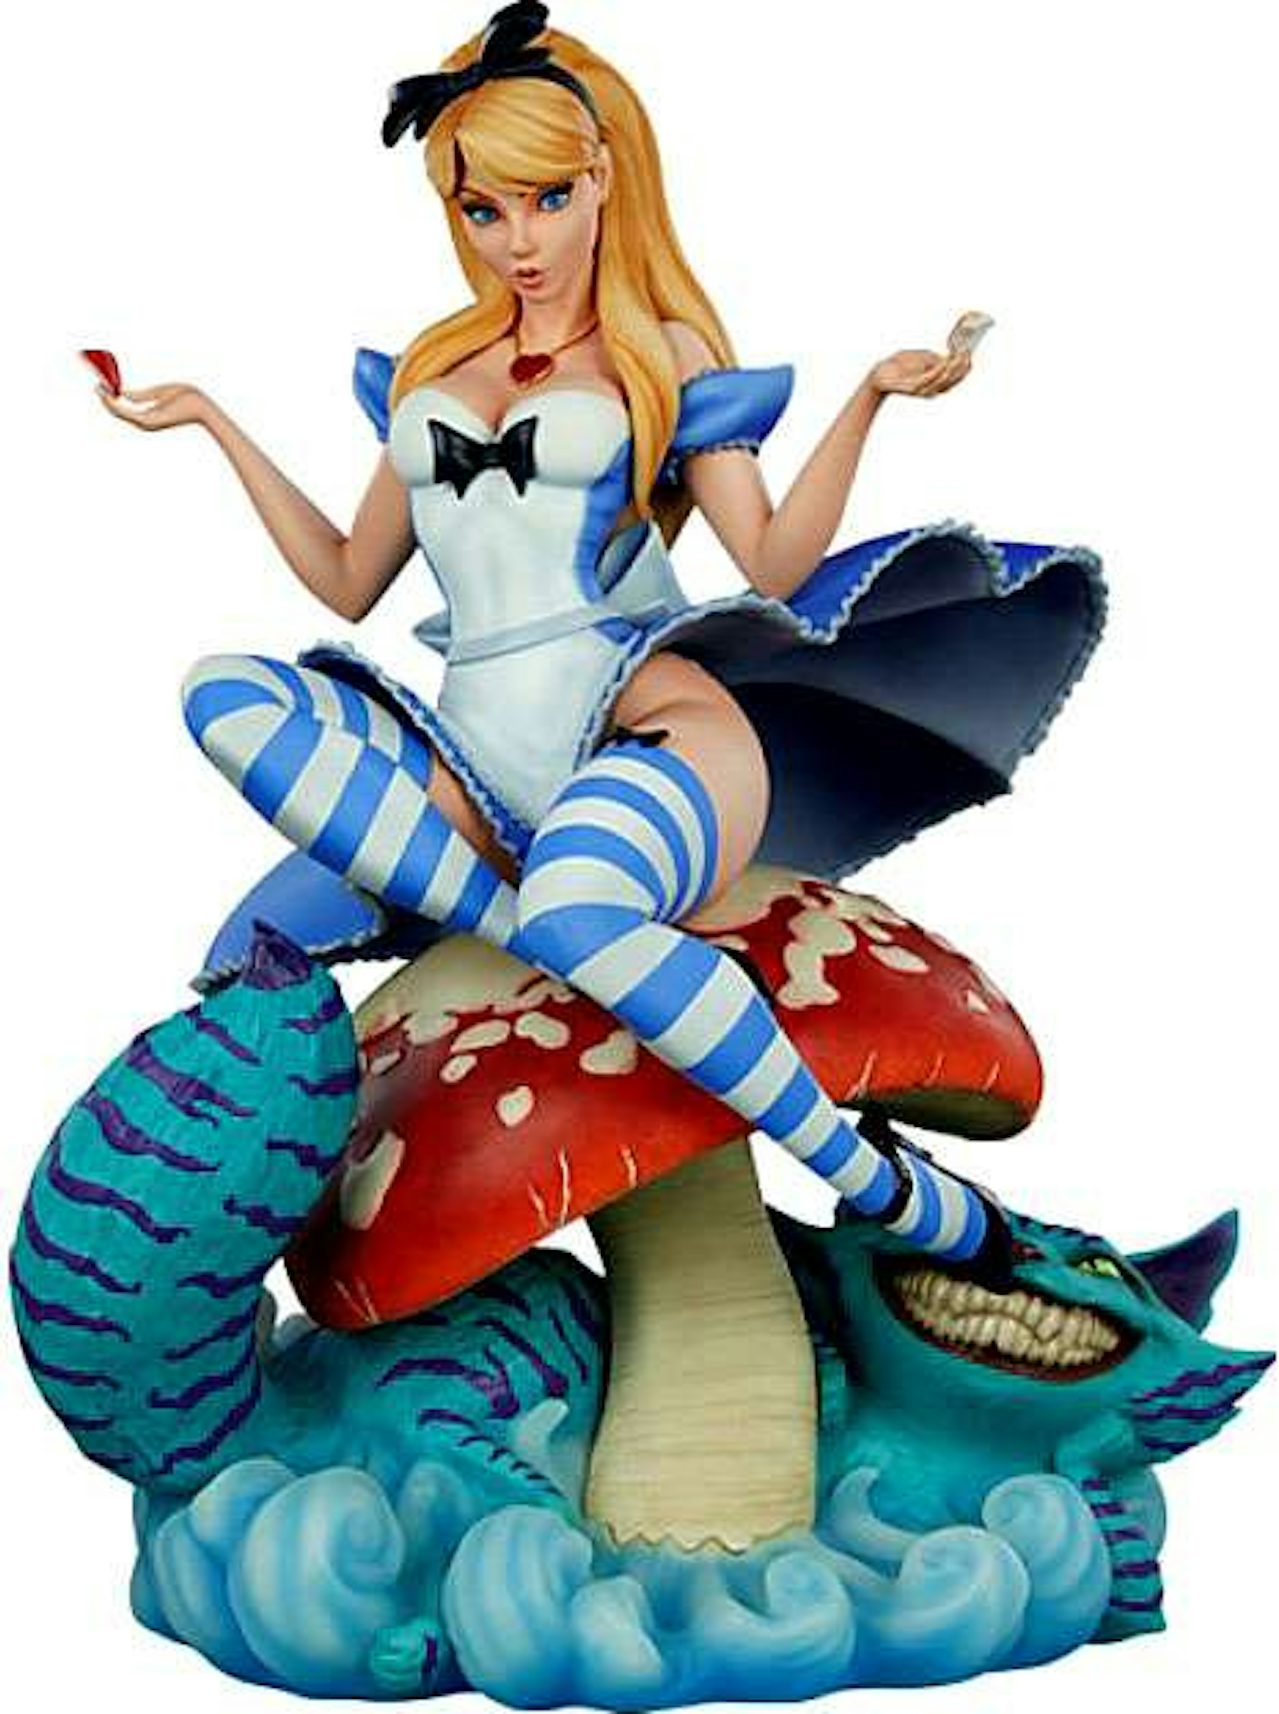 https://images.stockx.com/images/Sideshow-Collectibles-J-Scott-Campbell-Fairytale-Fantasies-Collection-Alice-in-Wonderland-Statue.jpg?fit=fill&bg=FFFFFF&w=1200&h=857&fm=jpg&auto=compress&dpr=2&trim=color&updated_at=1661736570&q=60